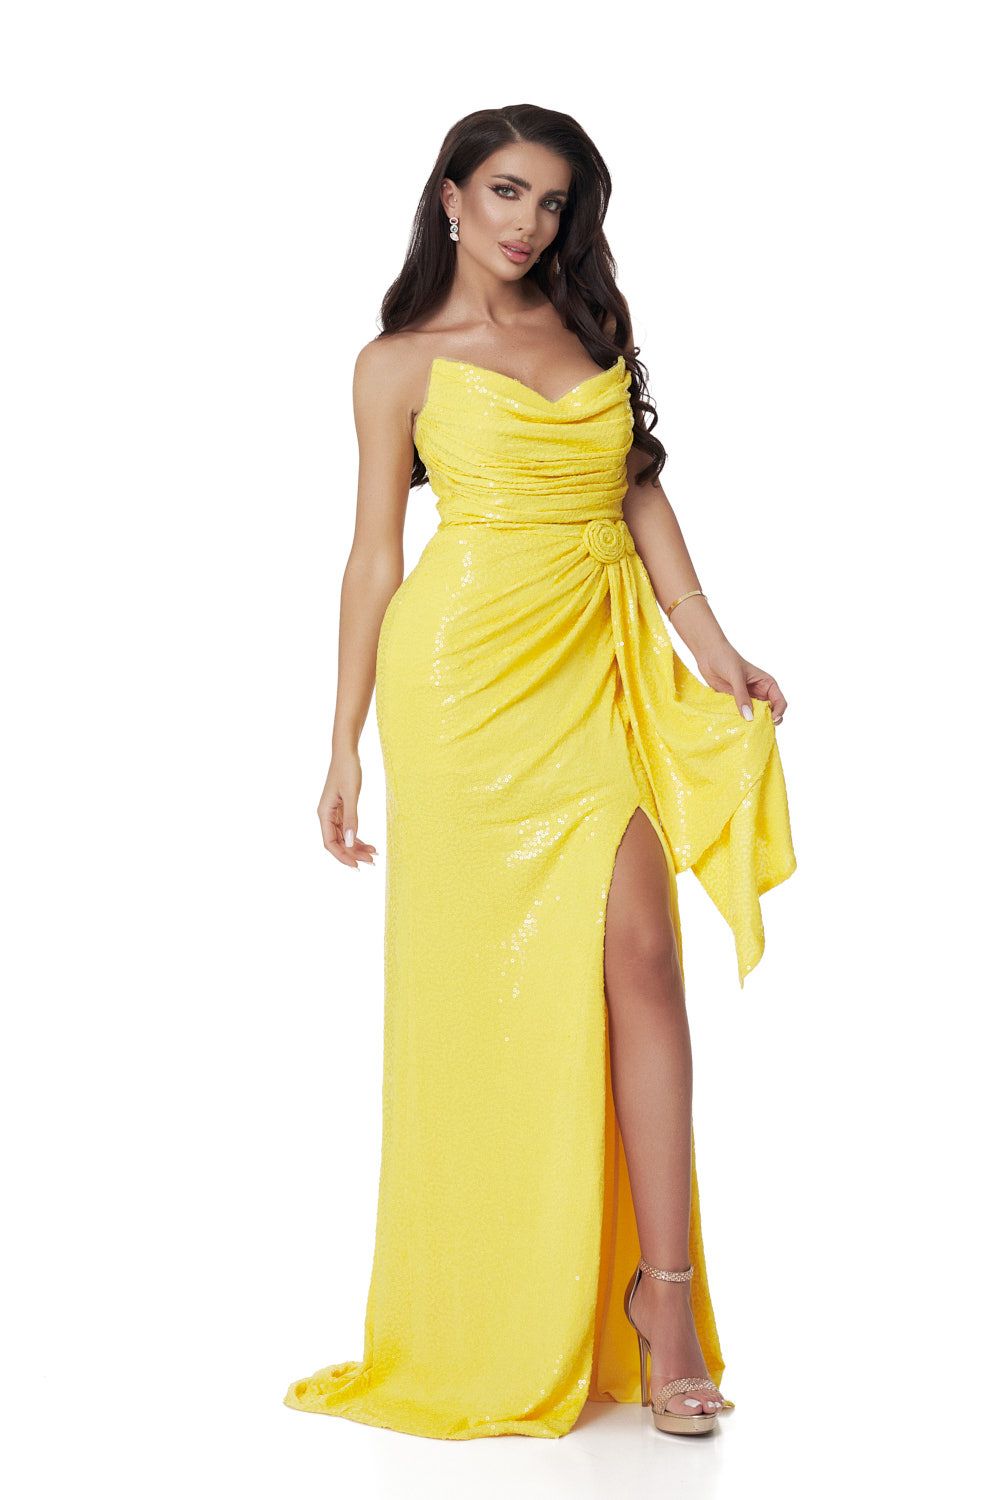 Long yellow sequin dress for women by Nicomede Bogas